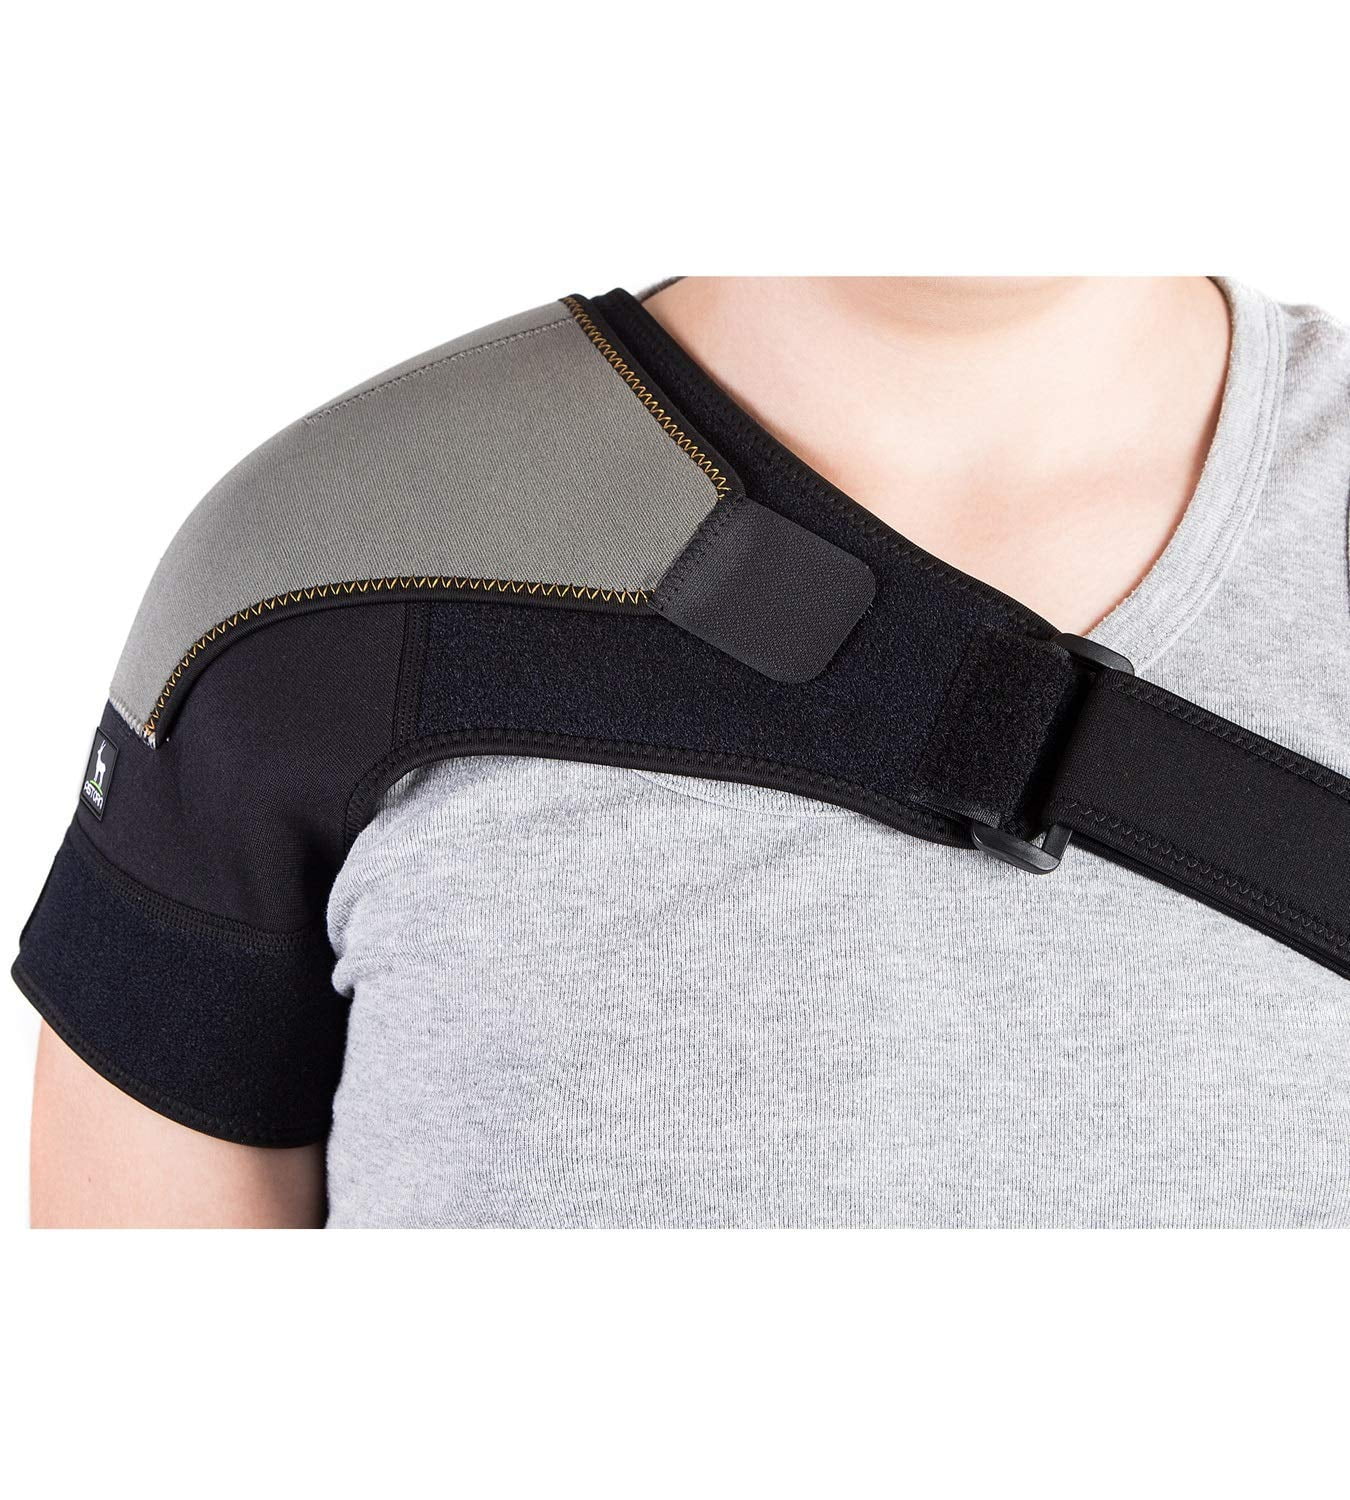 Zeeyh Rotator Cuff Brace for Women Men Shoulder Brace Support with  Adjustable Belt and Sleeve, Pressure Pad for hot or ice Pack for Shoulder  Impingement Syndrome, Tendonitis, Arthritis 